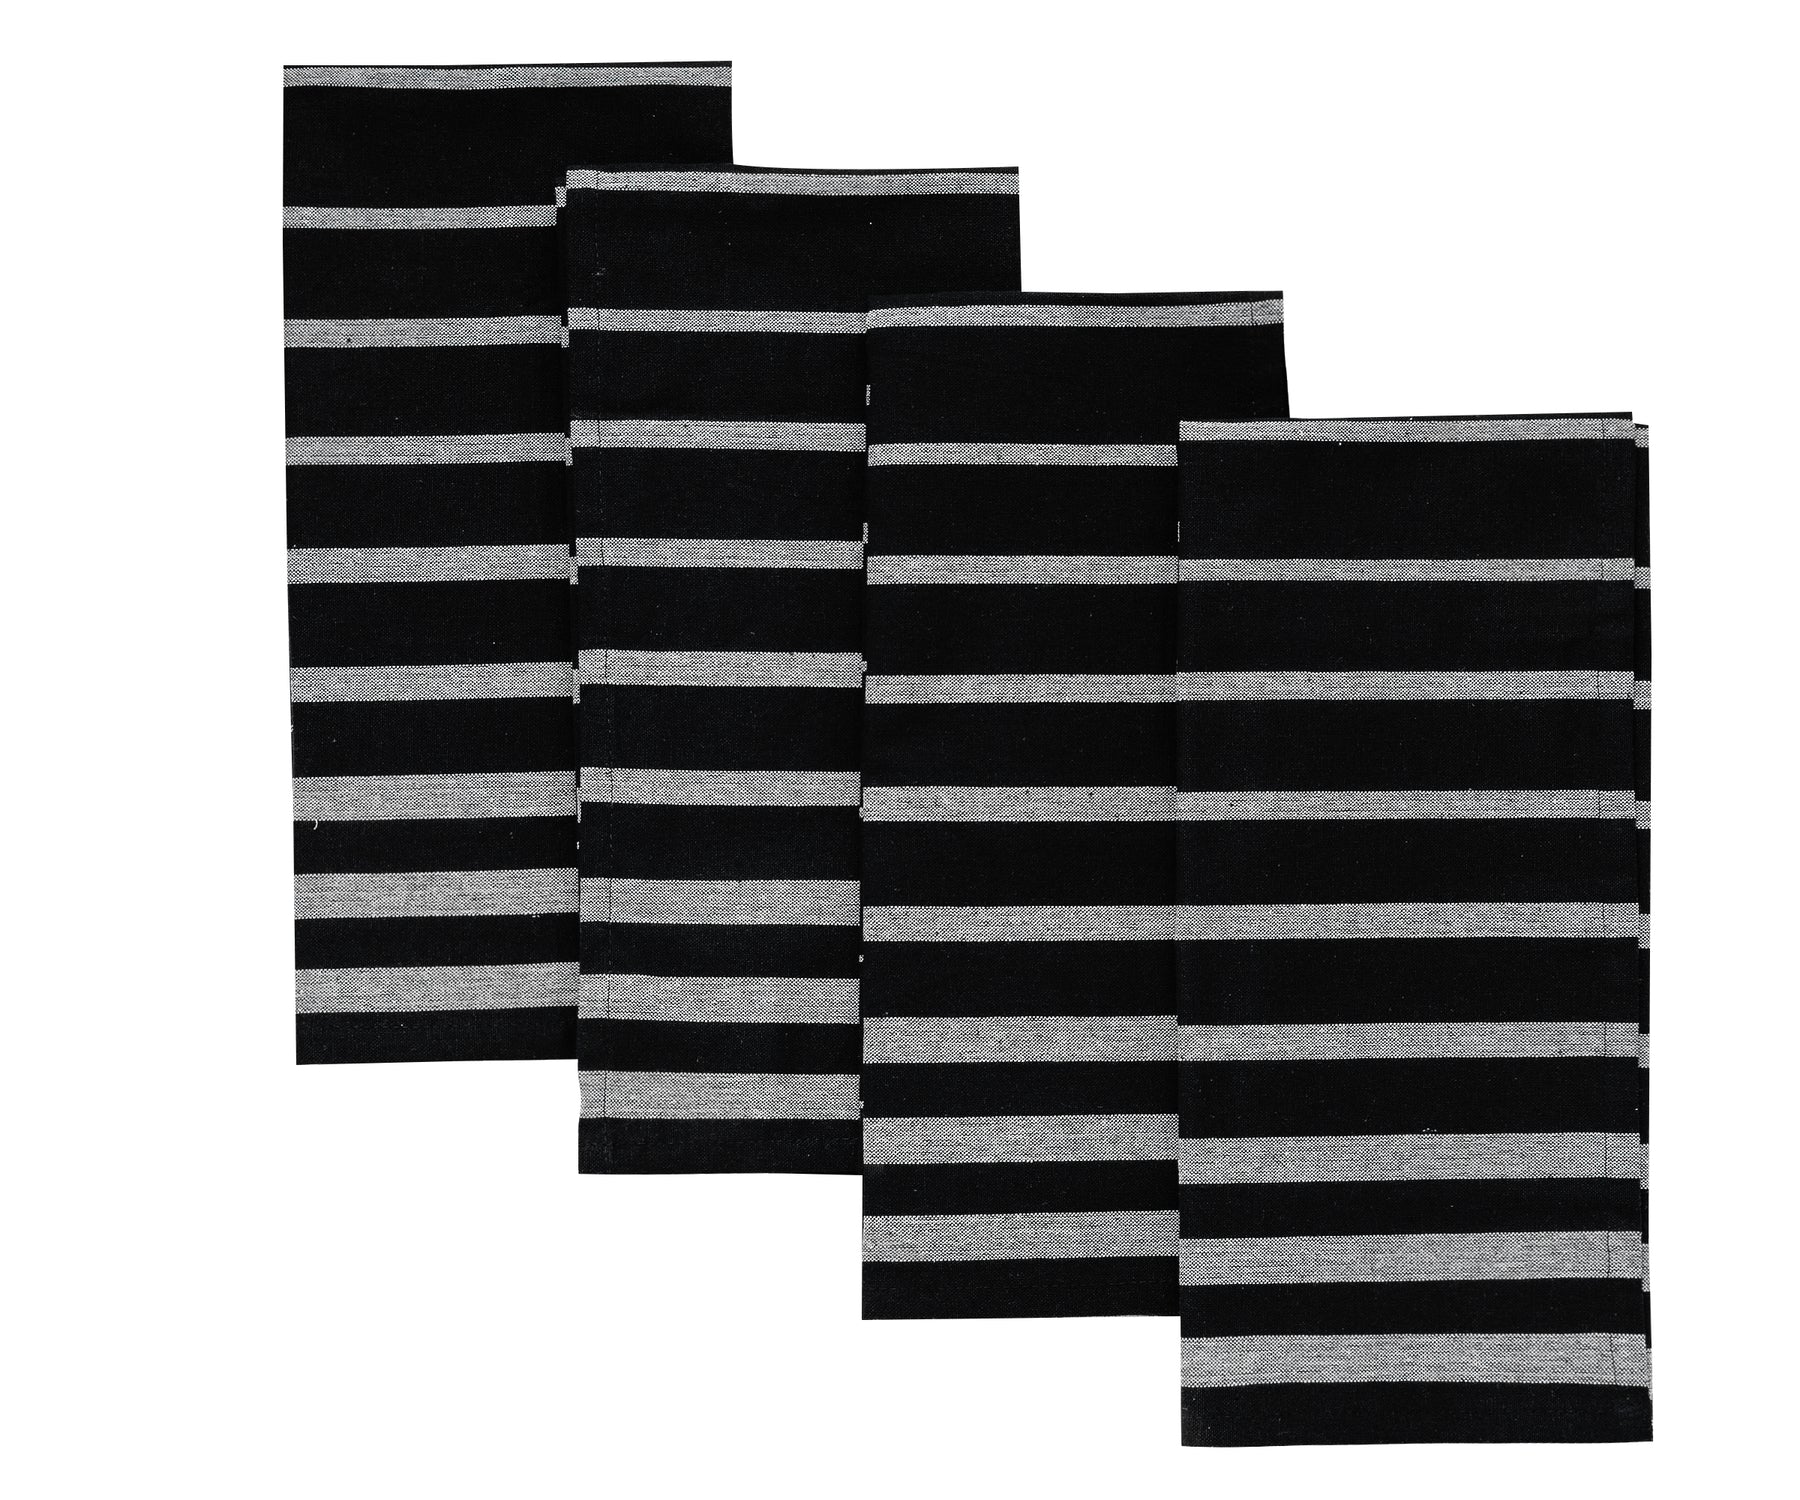 Personalized Kitchen Towels, Kitchen Cloth, Kitchen Linens, Kitchen Towel Bar, Kitchen Washcloths, Kitchen Towels Bulk, Linen Dish Towels, Cotton Tea Towels.A set of four dish towels with black and white rectangular stripes